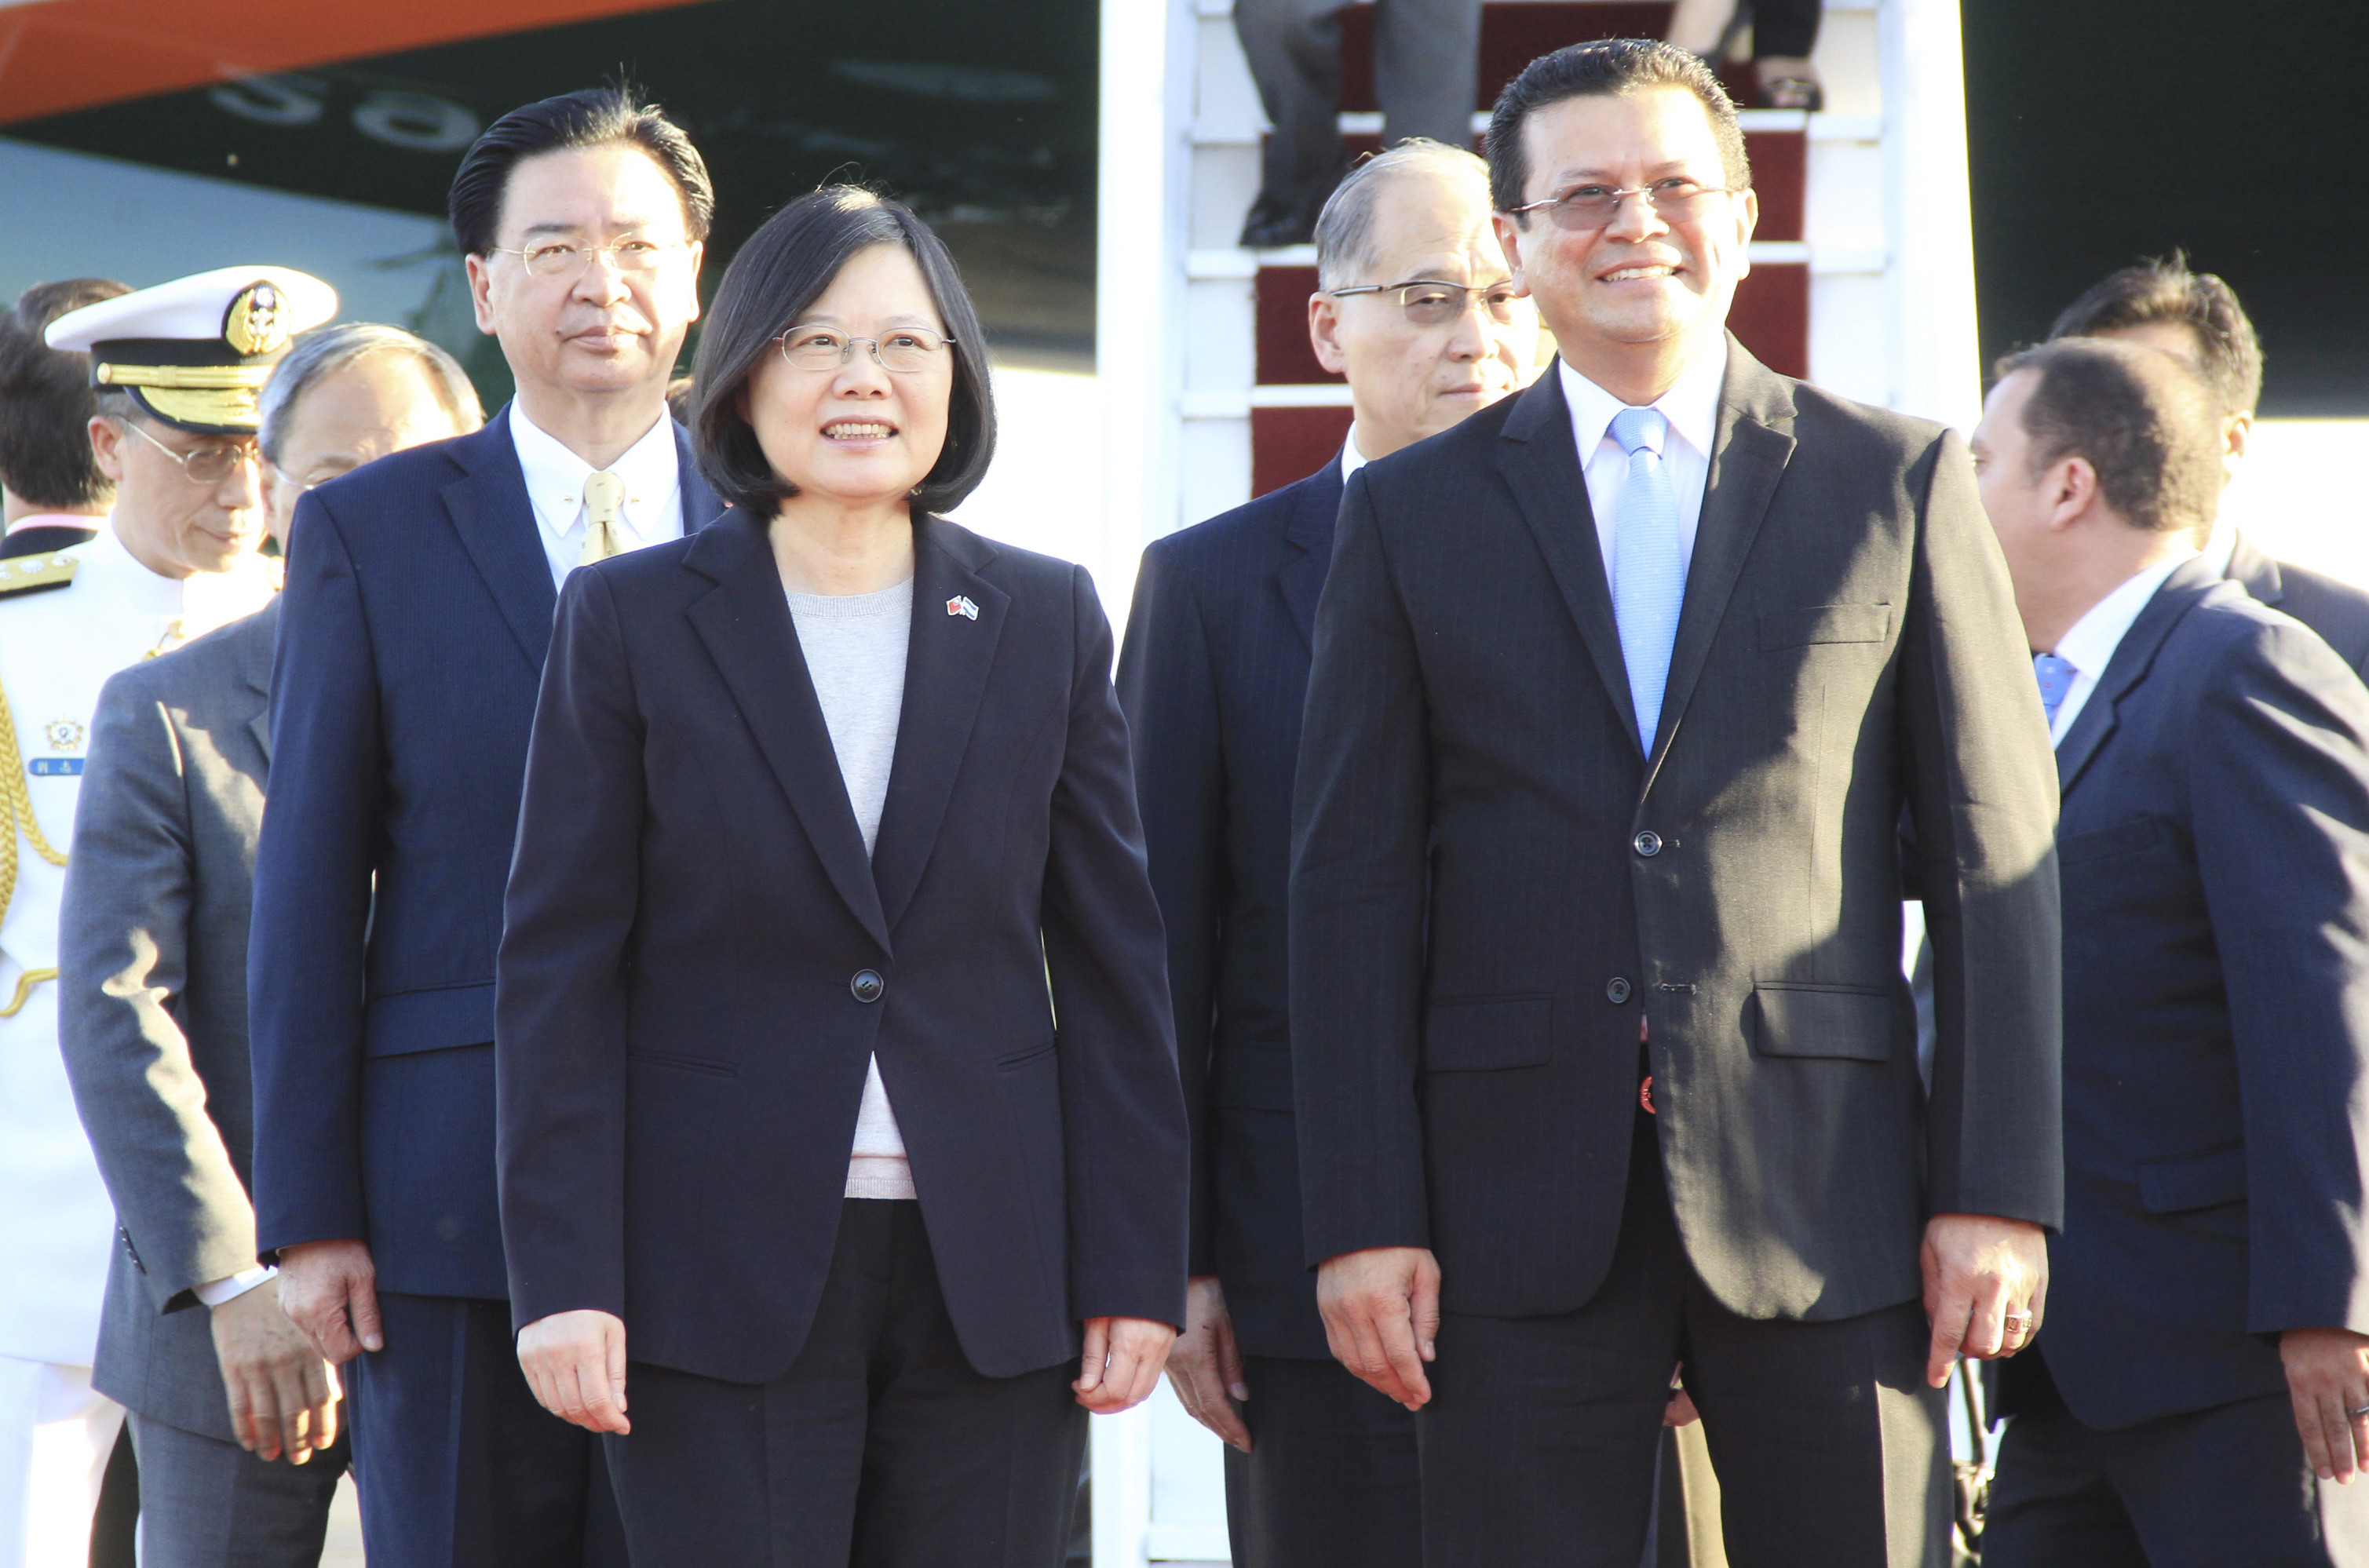 In this handout photo provided by the Salvadorian Chancery, Tsai Ing-wen, President of Taiwan, left, and the Chancellor of the Republic of El Salvador, Hugo Martínez, look on during her arrival at the Óscar Arnulfo Romero International Airport on Jan. 12, 2017, in La Paz, El Salvador (Mario Pascassio/Chancery/Getty Images Latam)